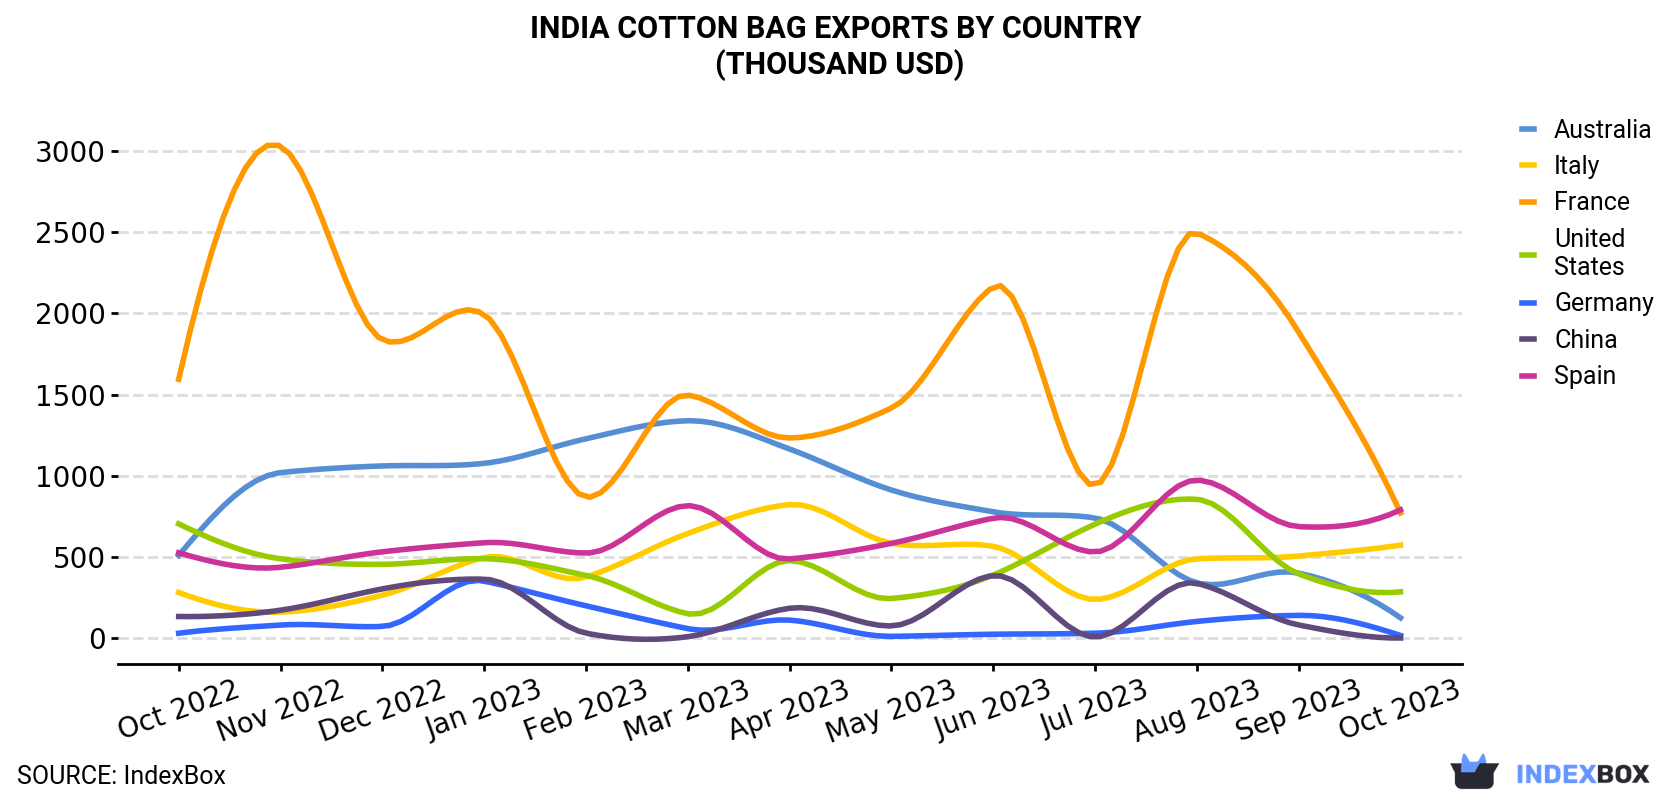 India Cotton Bag Exports By Country (Thousand USD)